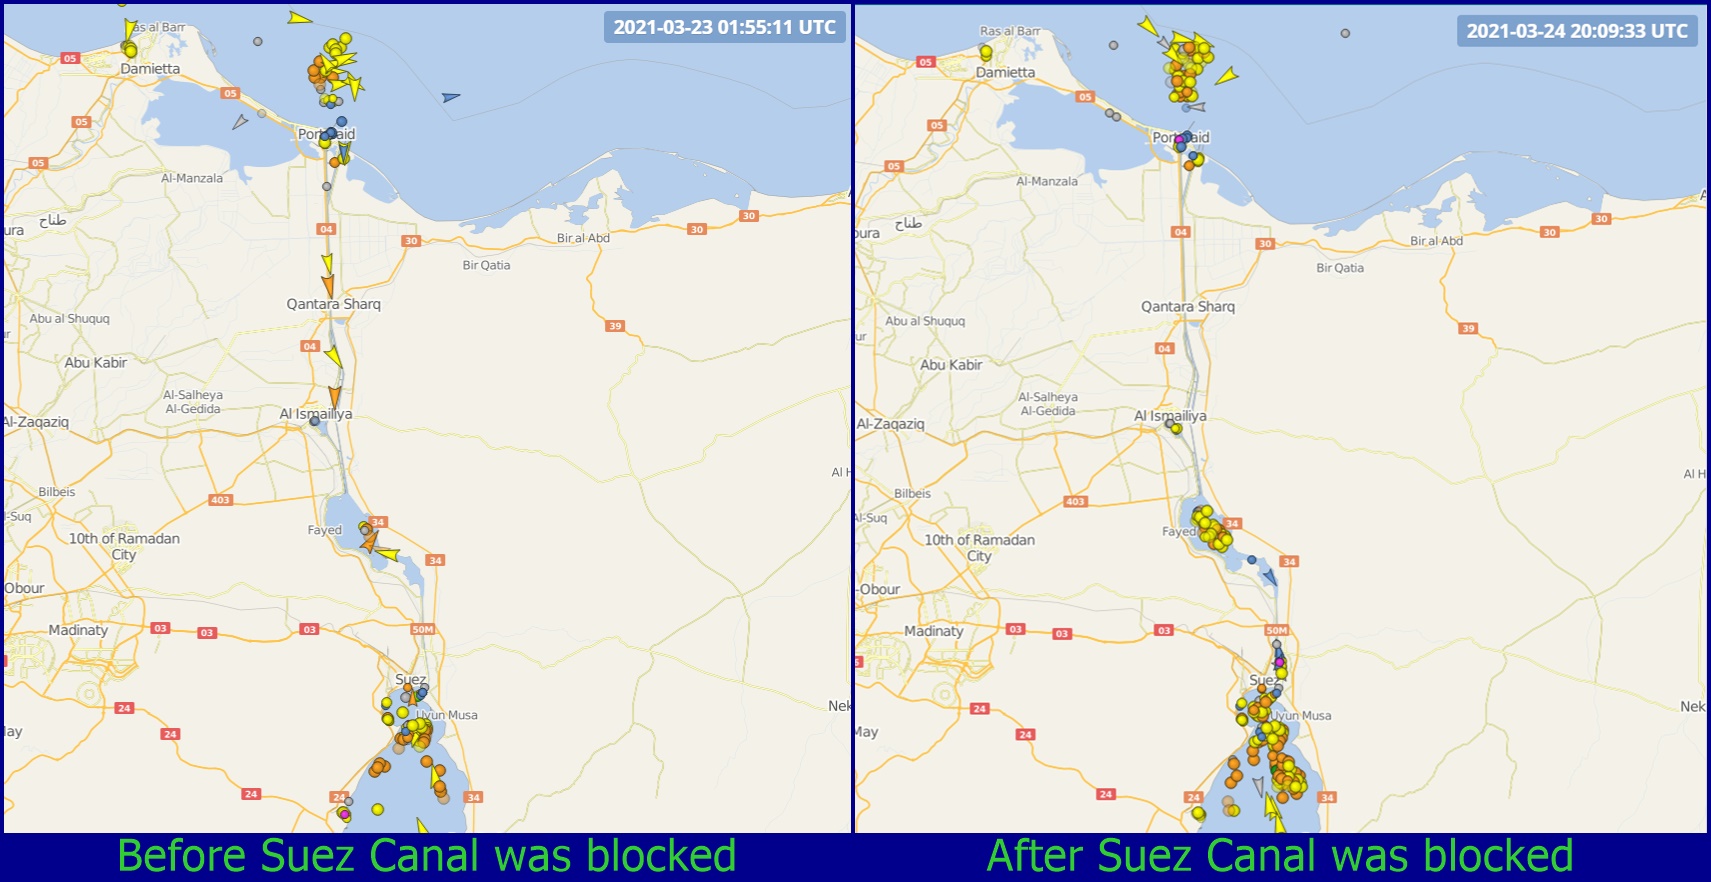 Before and after the blockage of Suez Canal